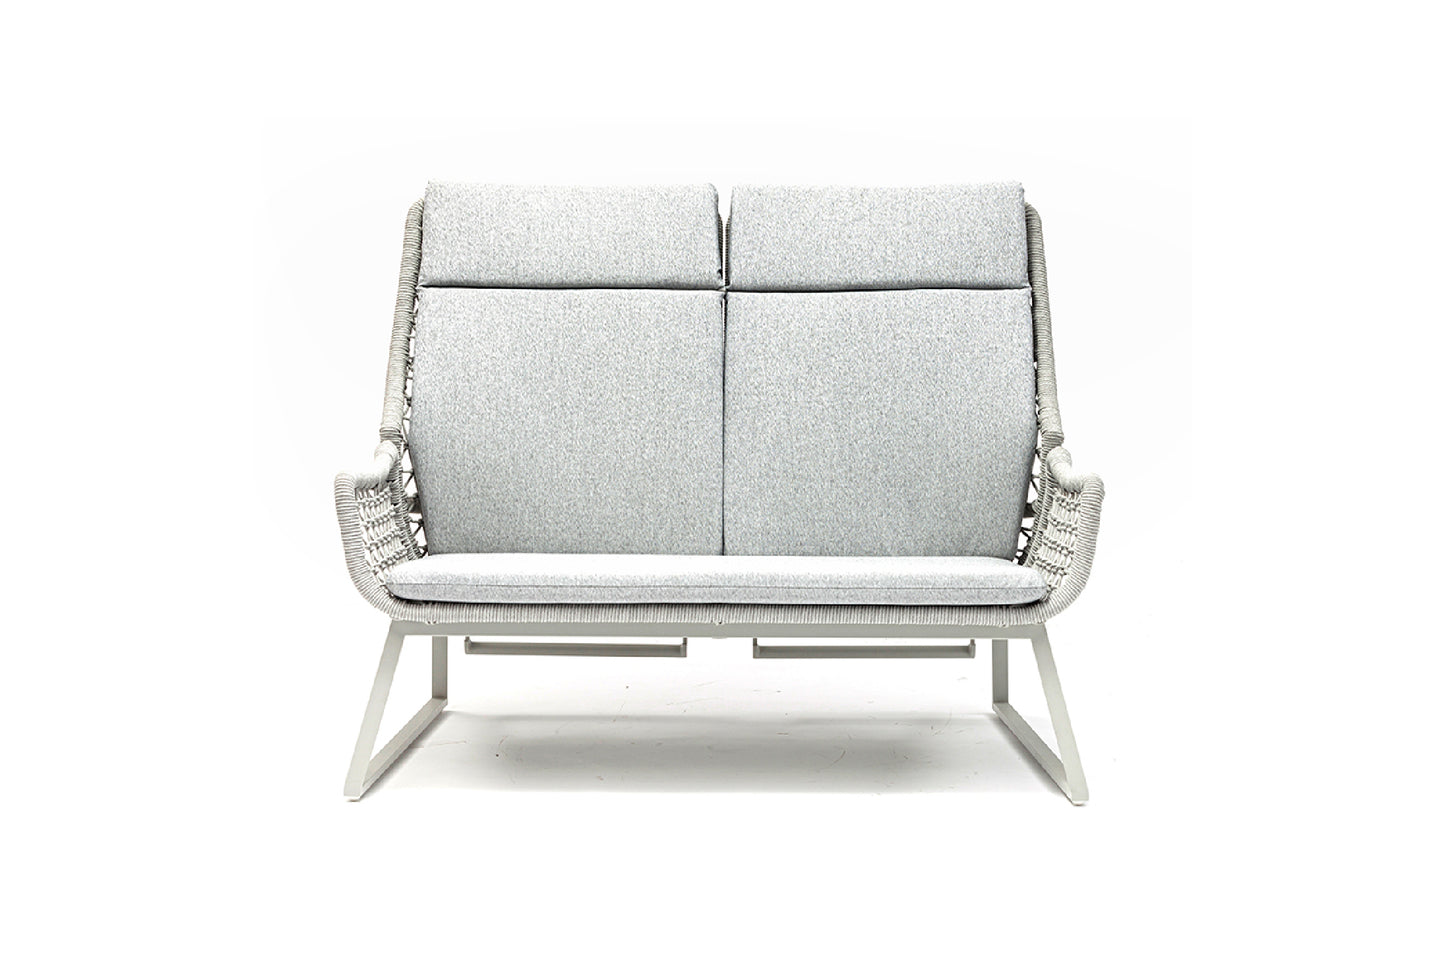 Couture Jardin | Dream | Outdoor 2 Seater